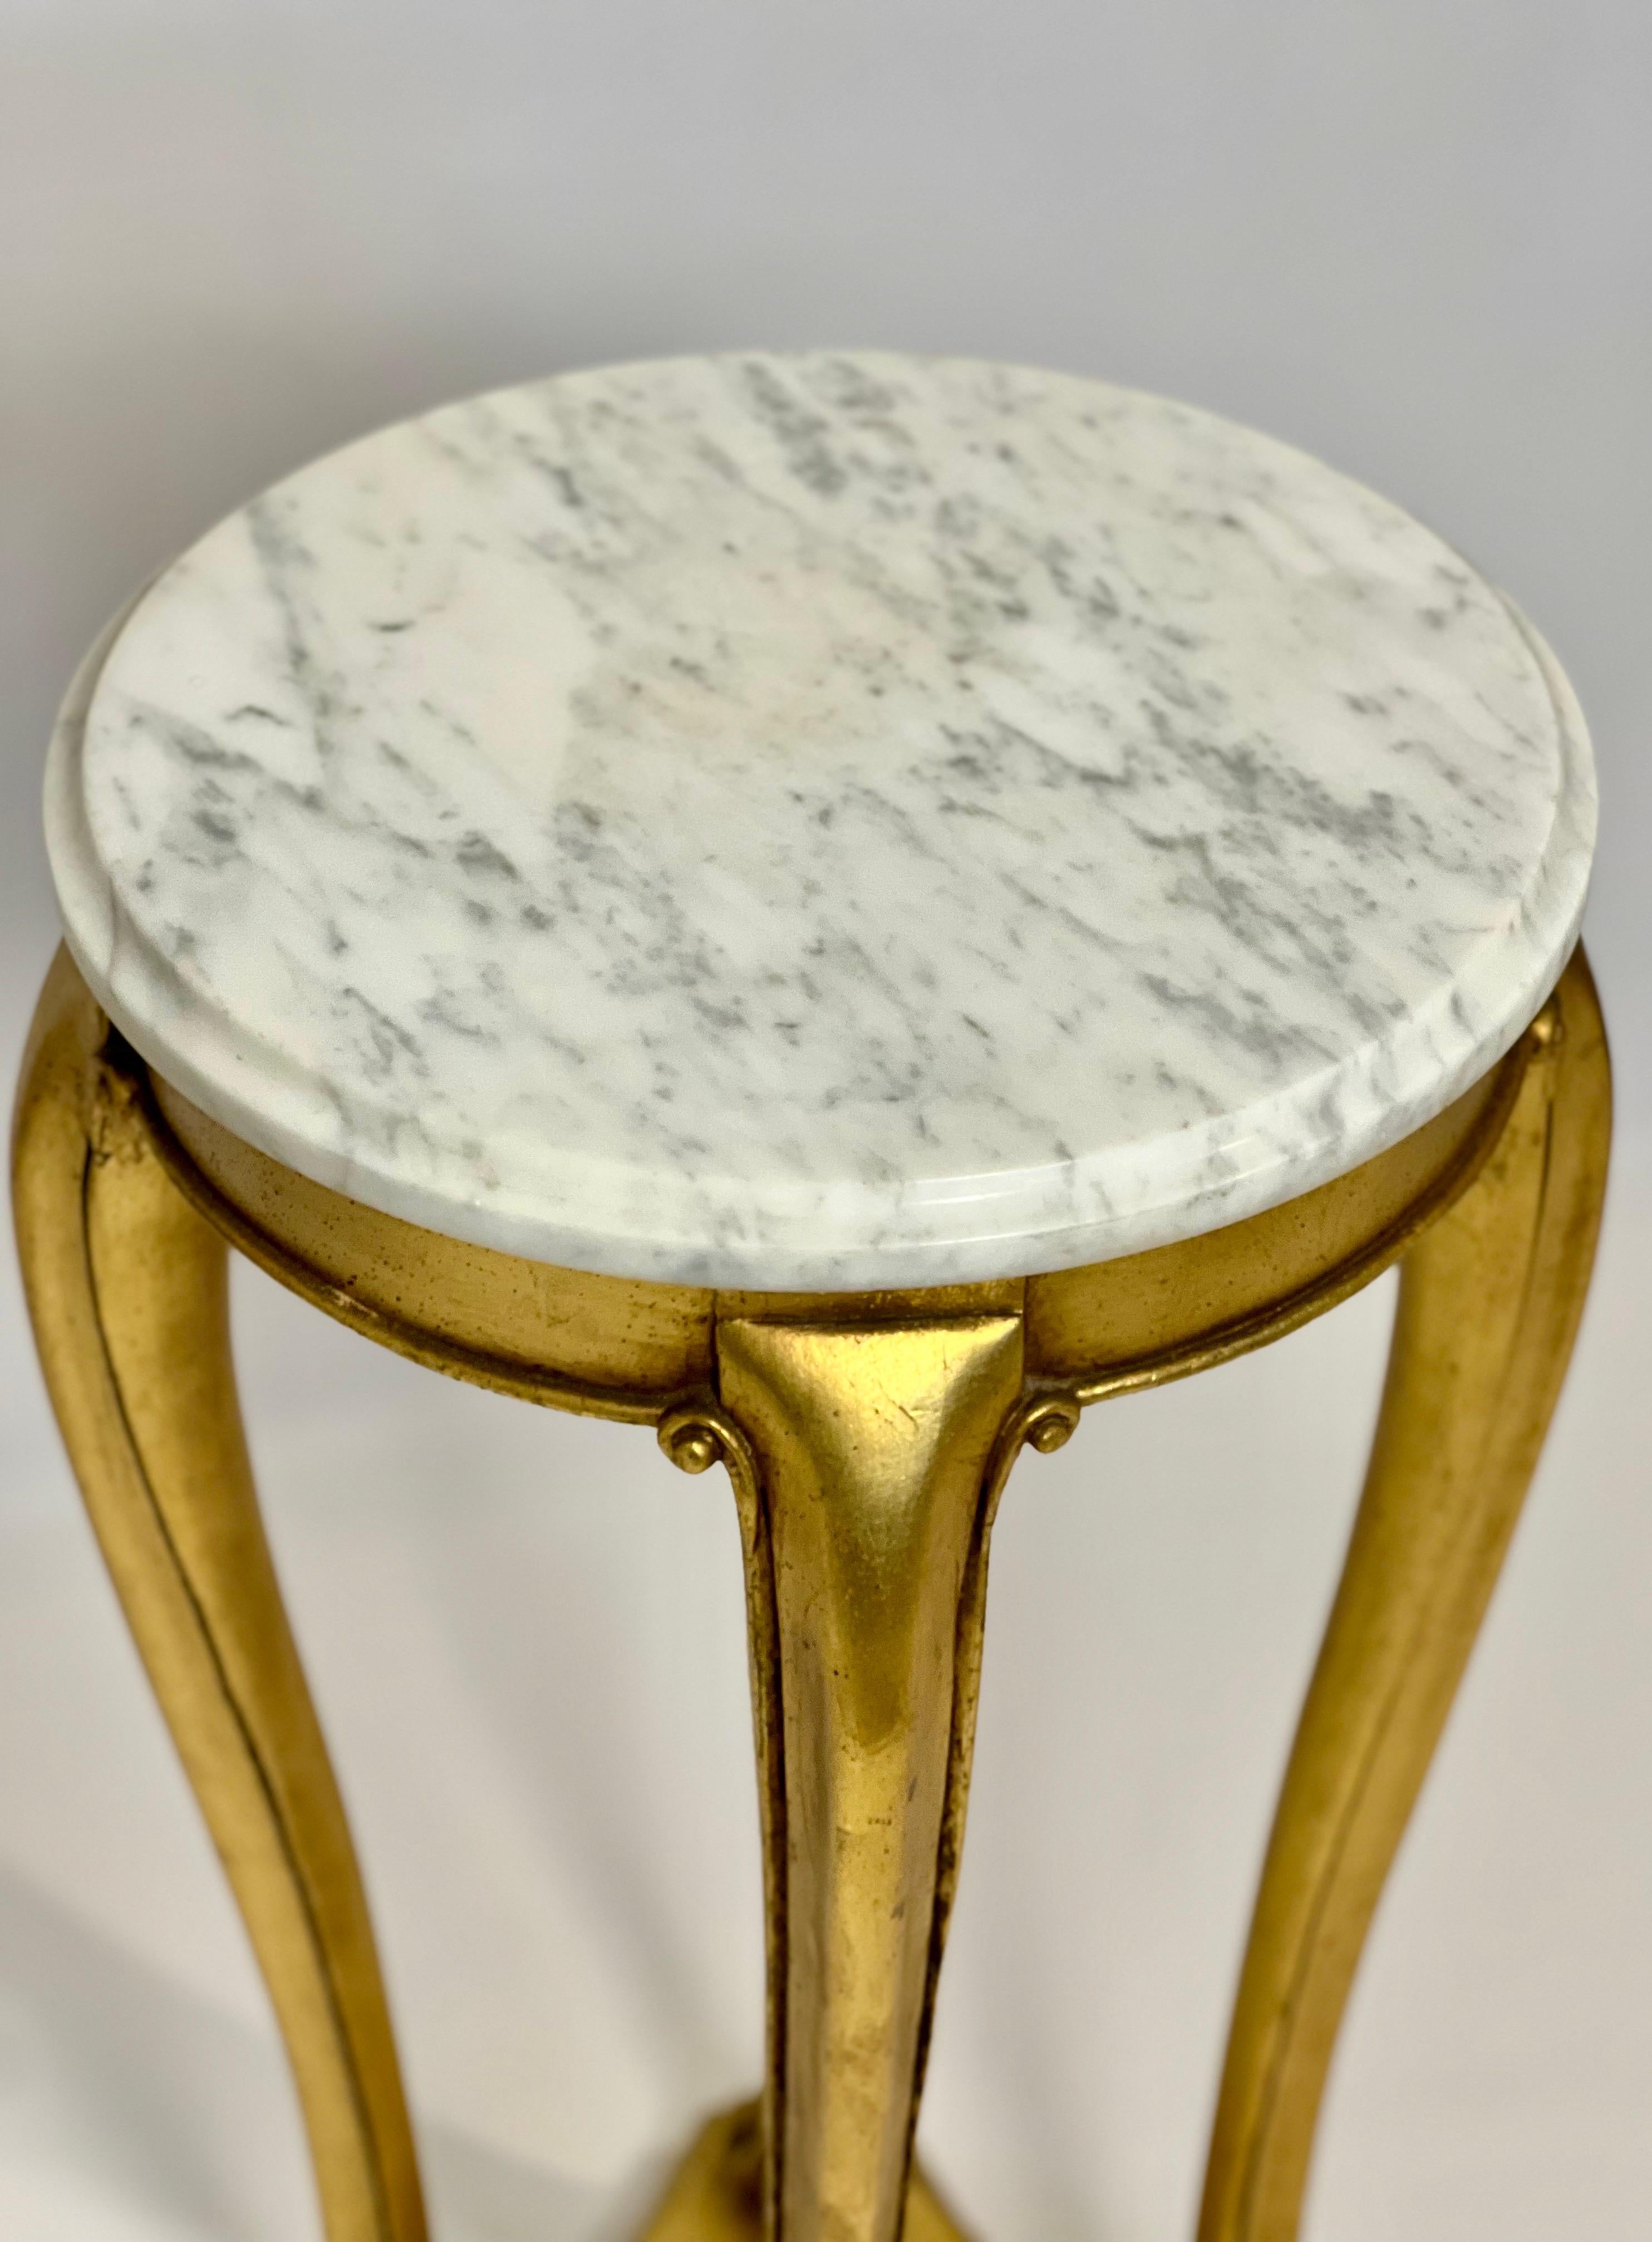 19th Century Regency Style Gilt Wood Marble Top Pedestal or Plant Stand In Good Condition For Sale In Doylestown, PA